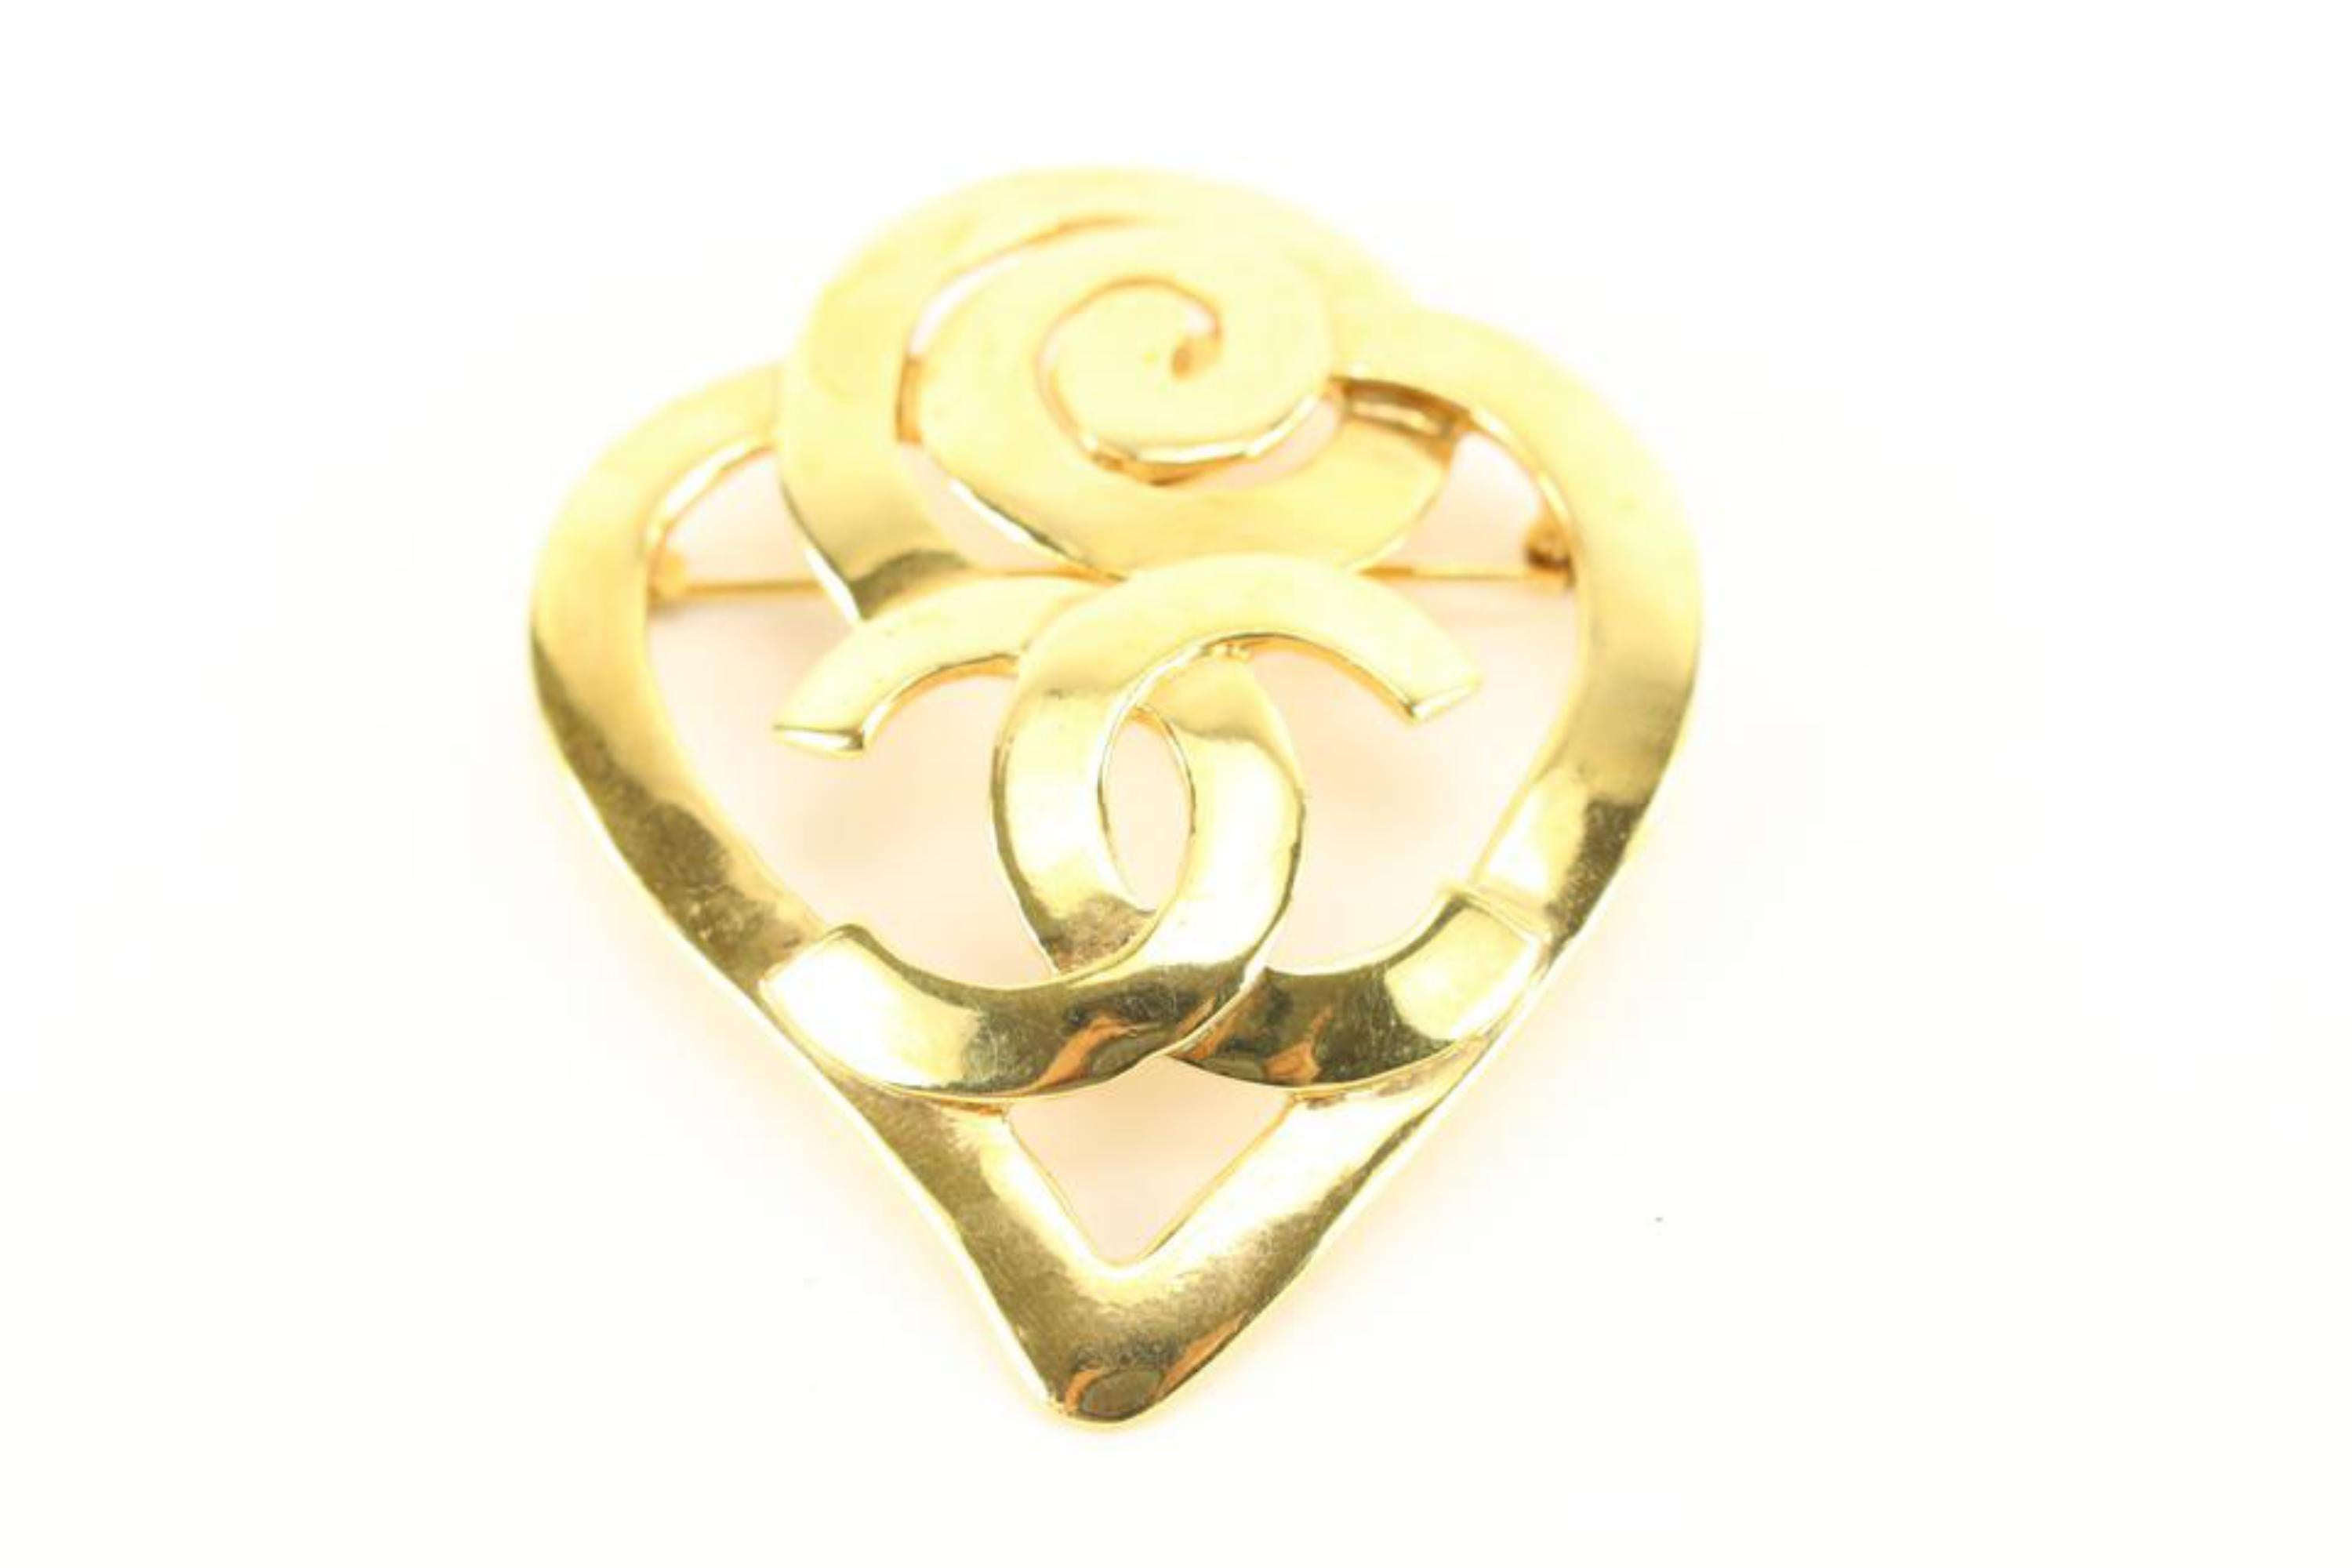 Beige Chanel 95p Spiral Heart CC Brooch Pin Corsage 29ck824s For Sale